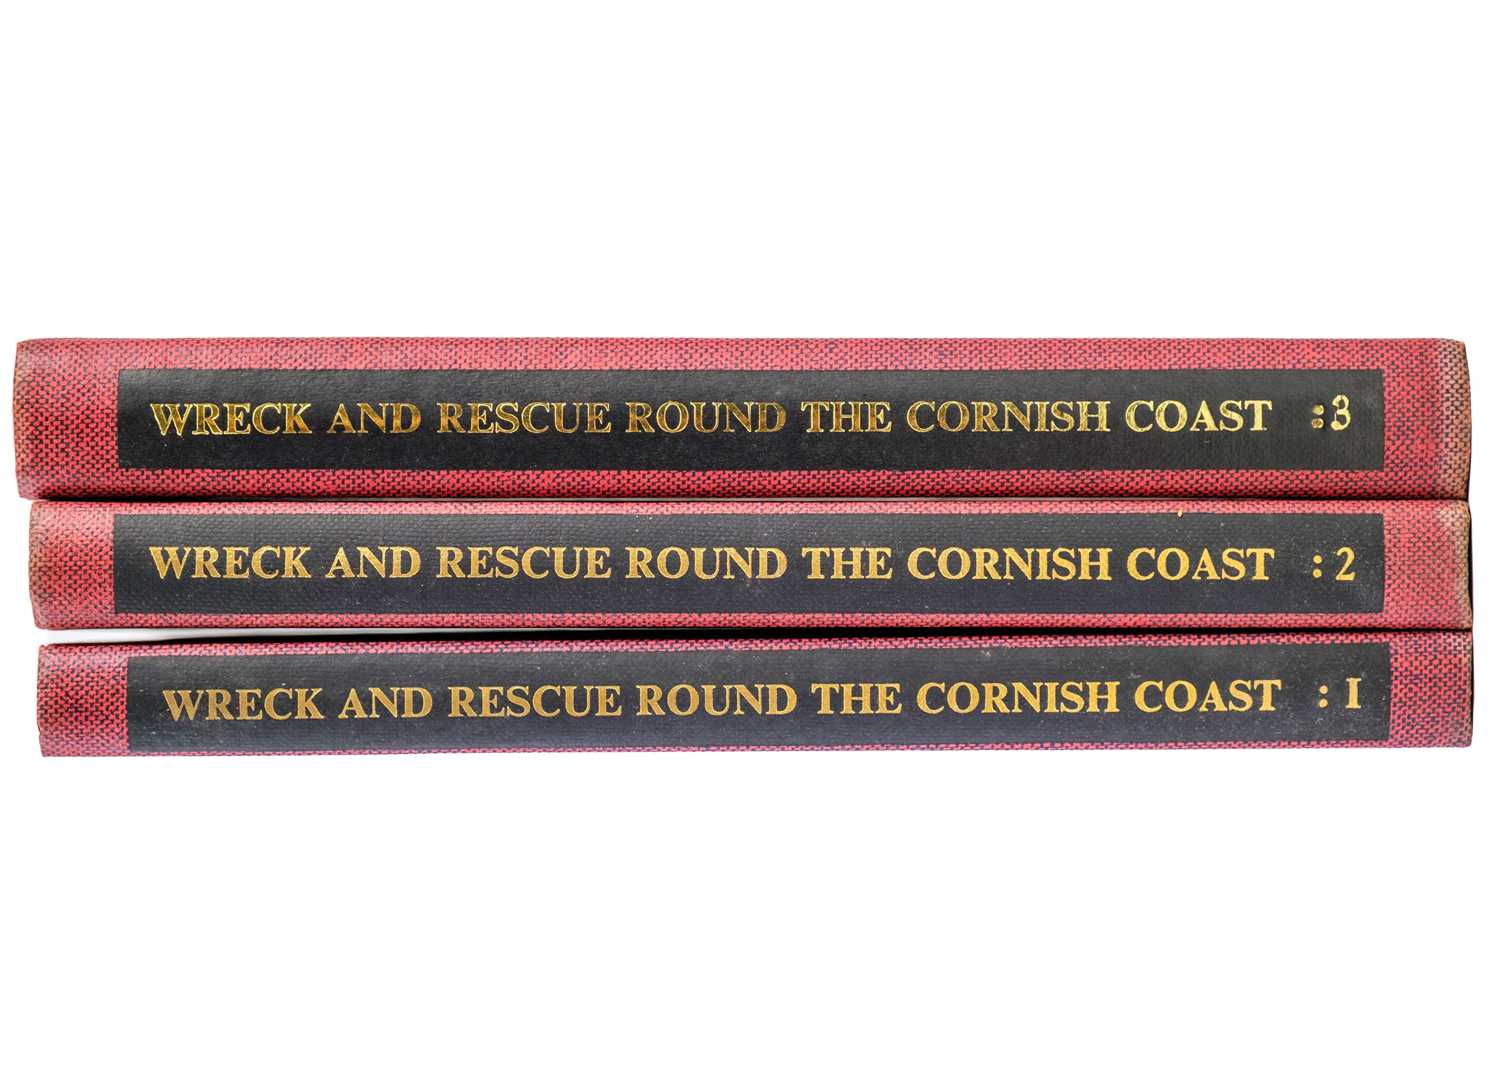 NOALL, Cyril and FARR, Grahame 'Wreck And Rescue Round The Cornish Coast', three book-set - Image 9 of 11